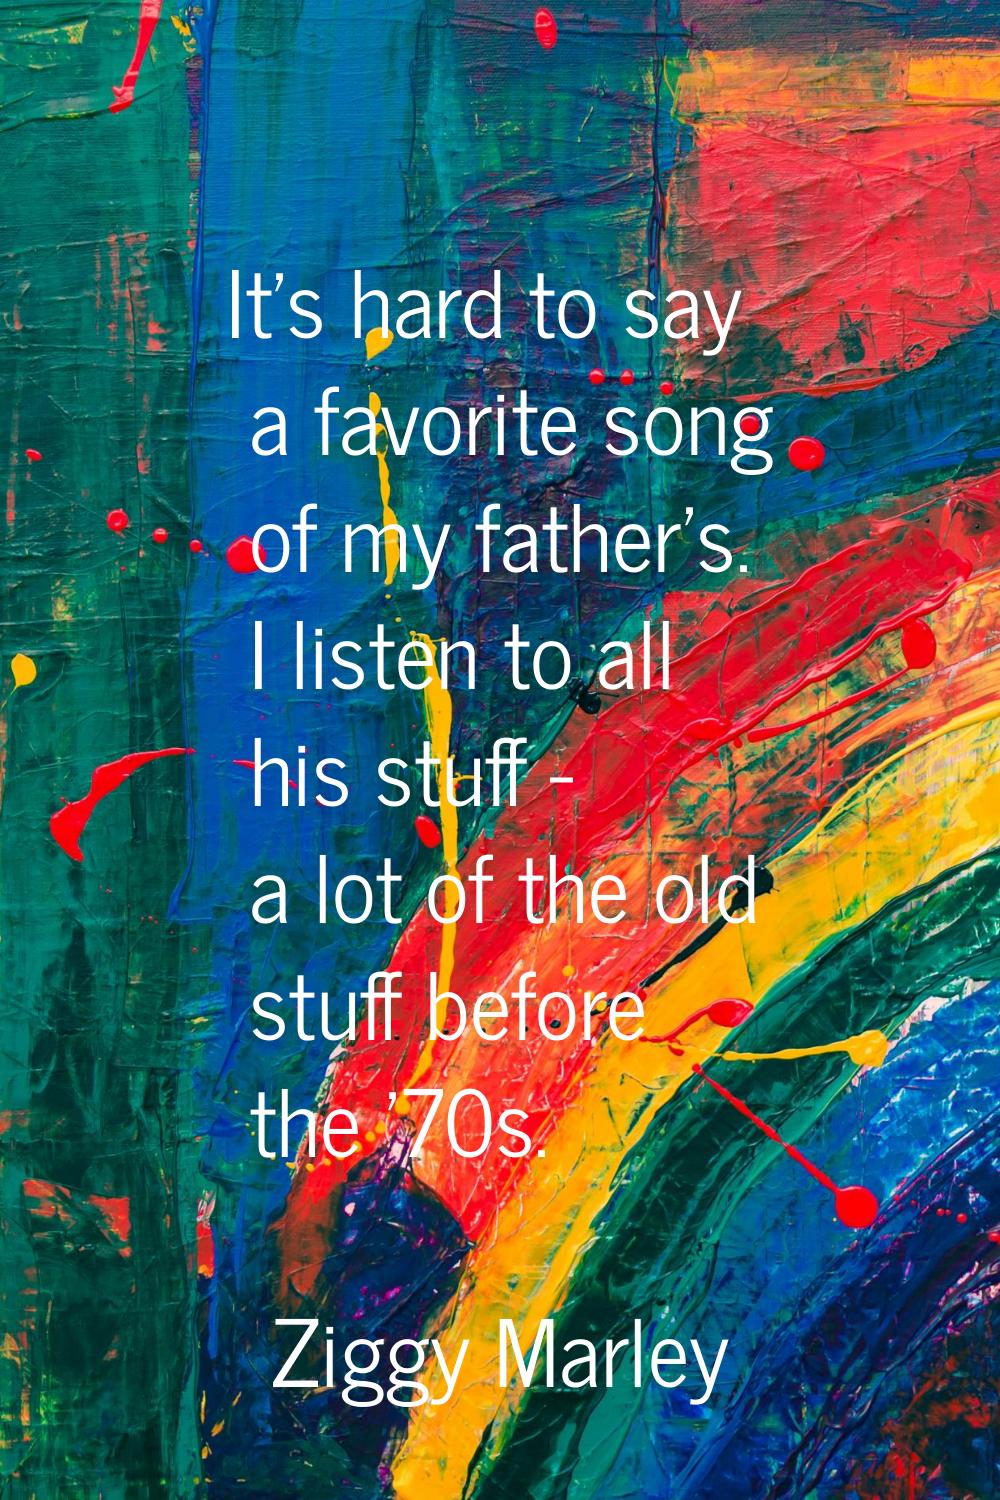 It's hard to say a favorite song of my father's. I listen to all his stuff - a lot of the old stuff